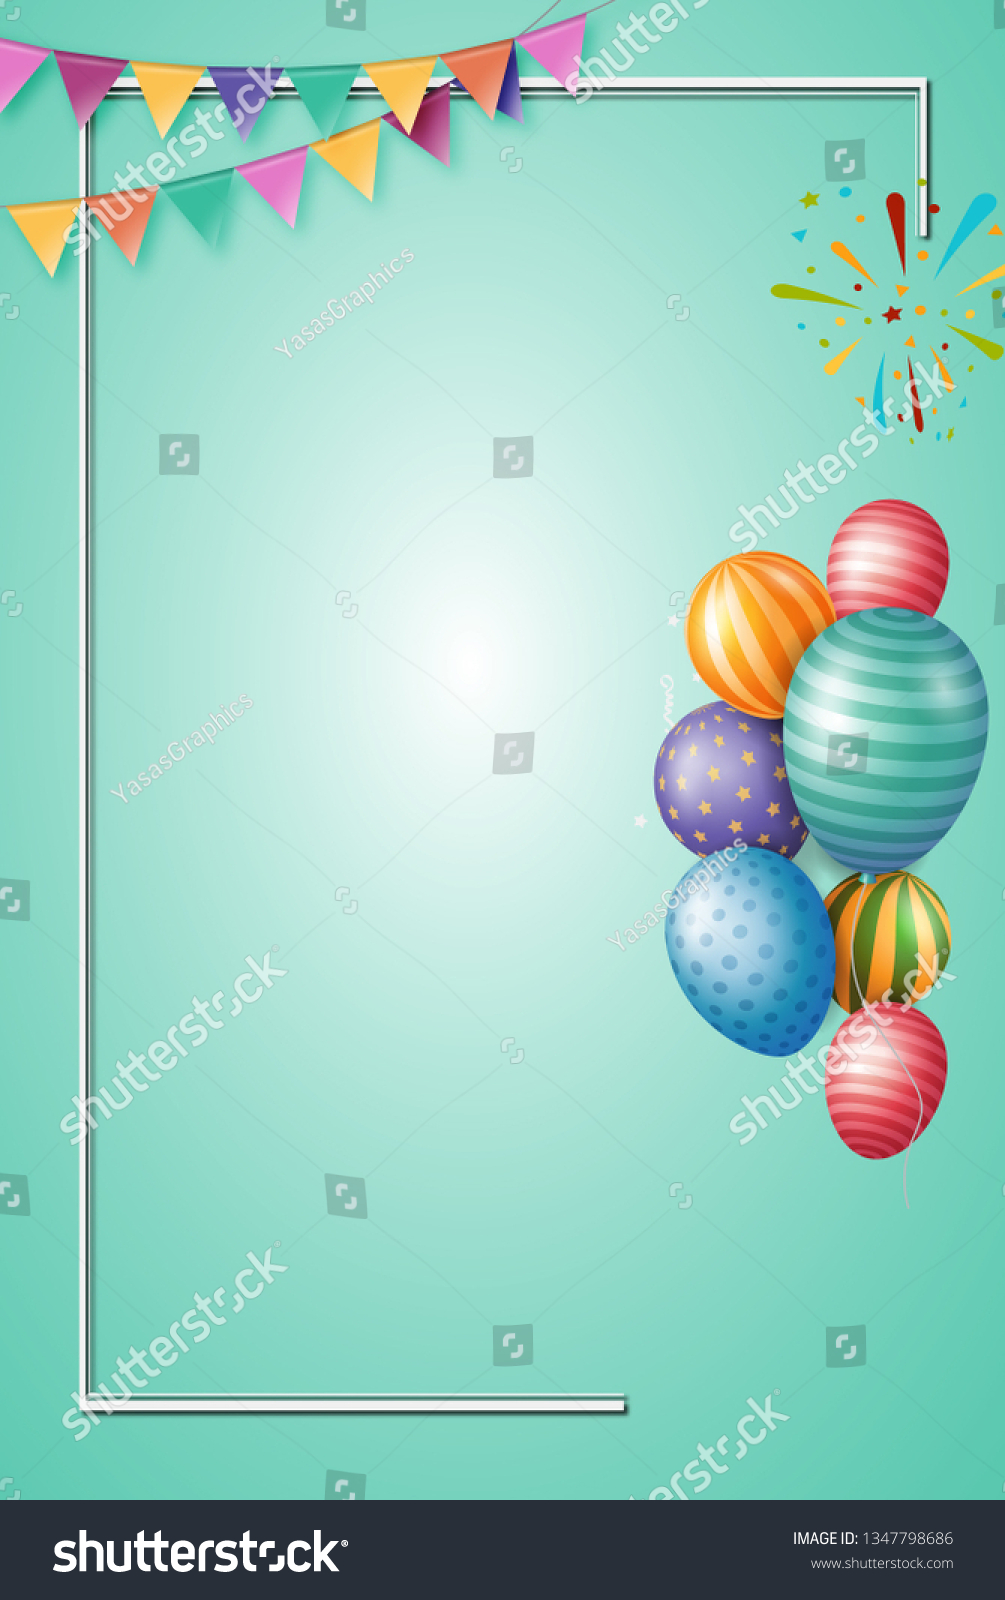 Birthday Invitation Card Background Stock Illustration 1347798686 Lovepik provides 260000+ invitation card background photos in hd resolution that updates everyday, you can free download for both personal and commerical use. https www shutterstock com image illustration birthday invitation card background 1347798686